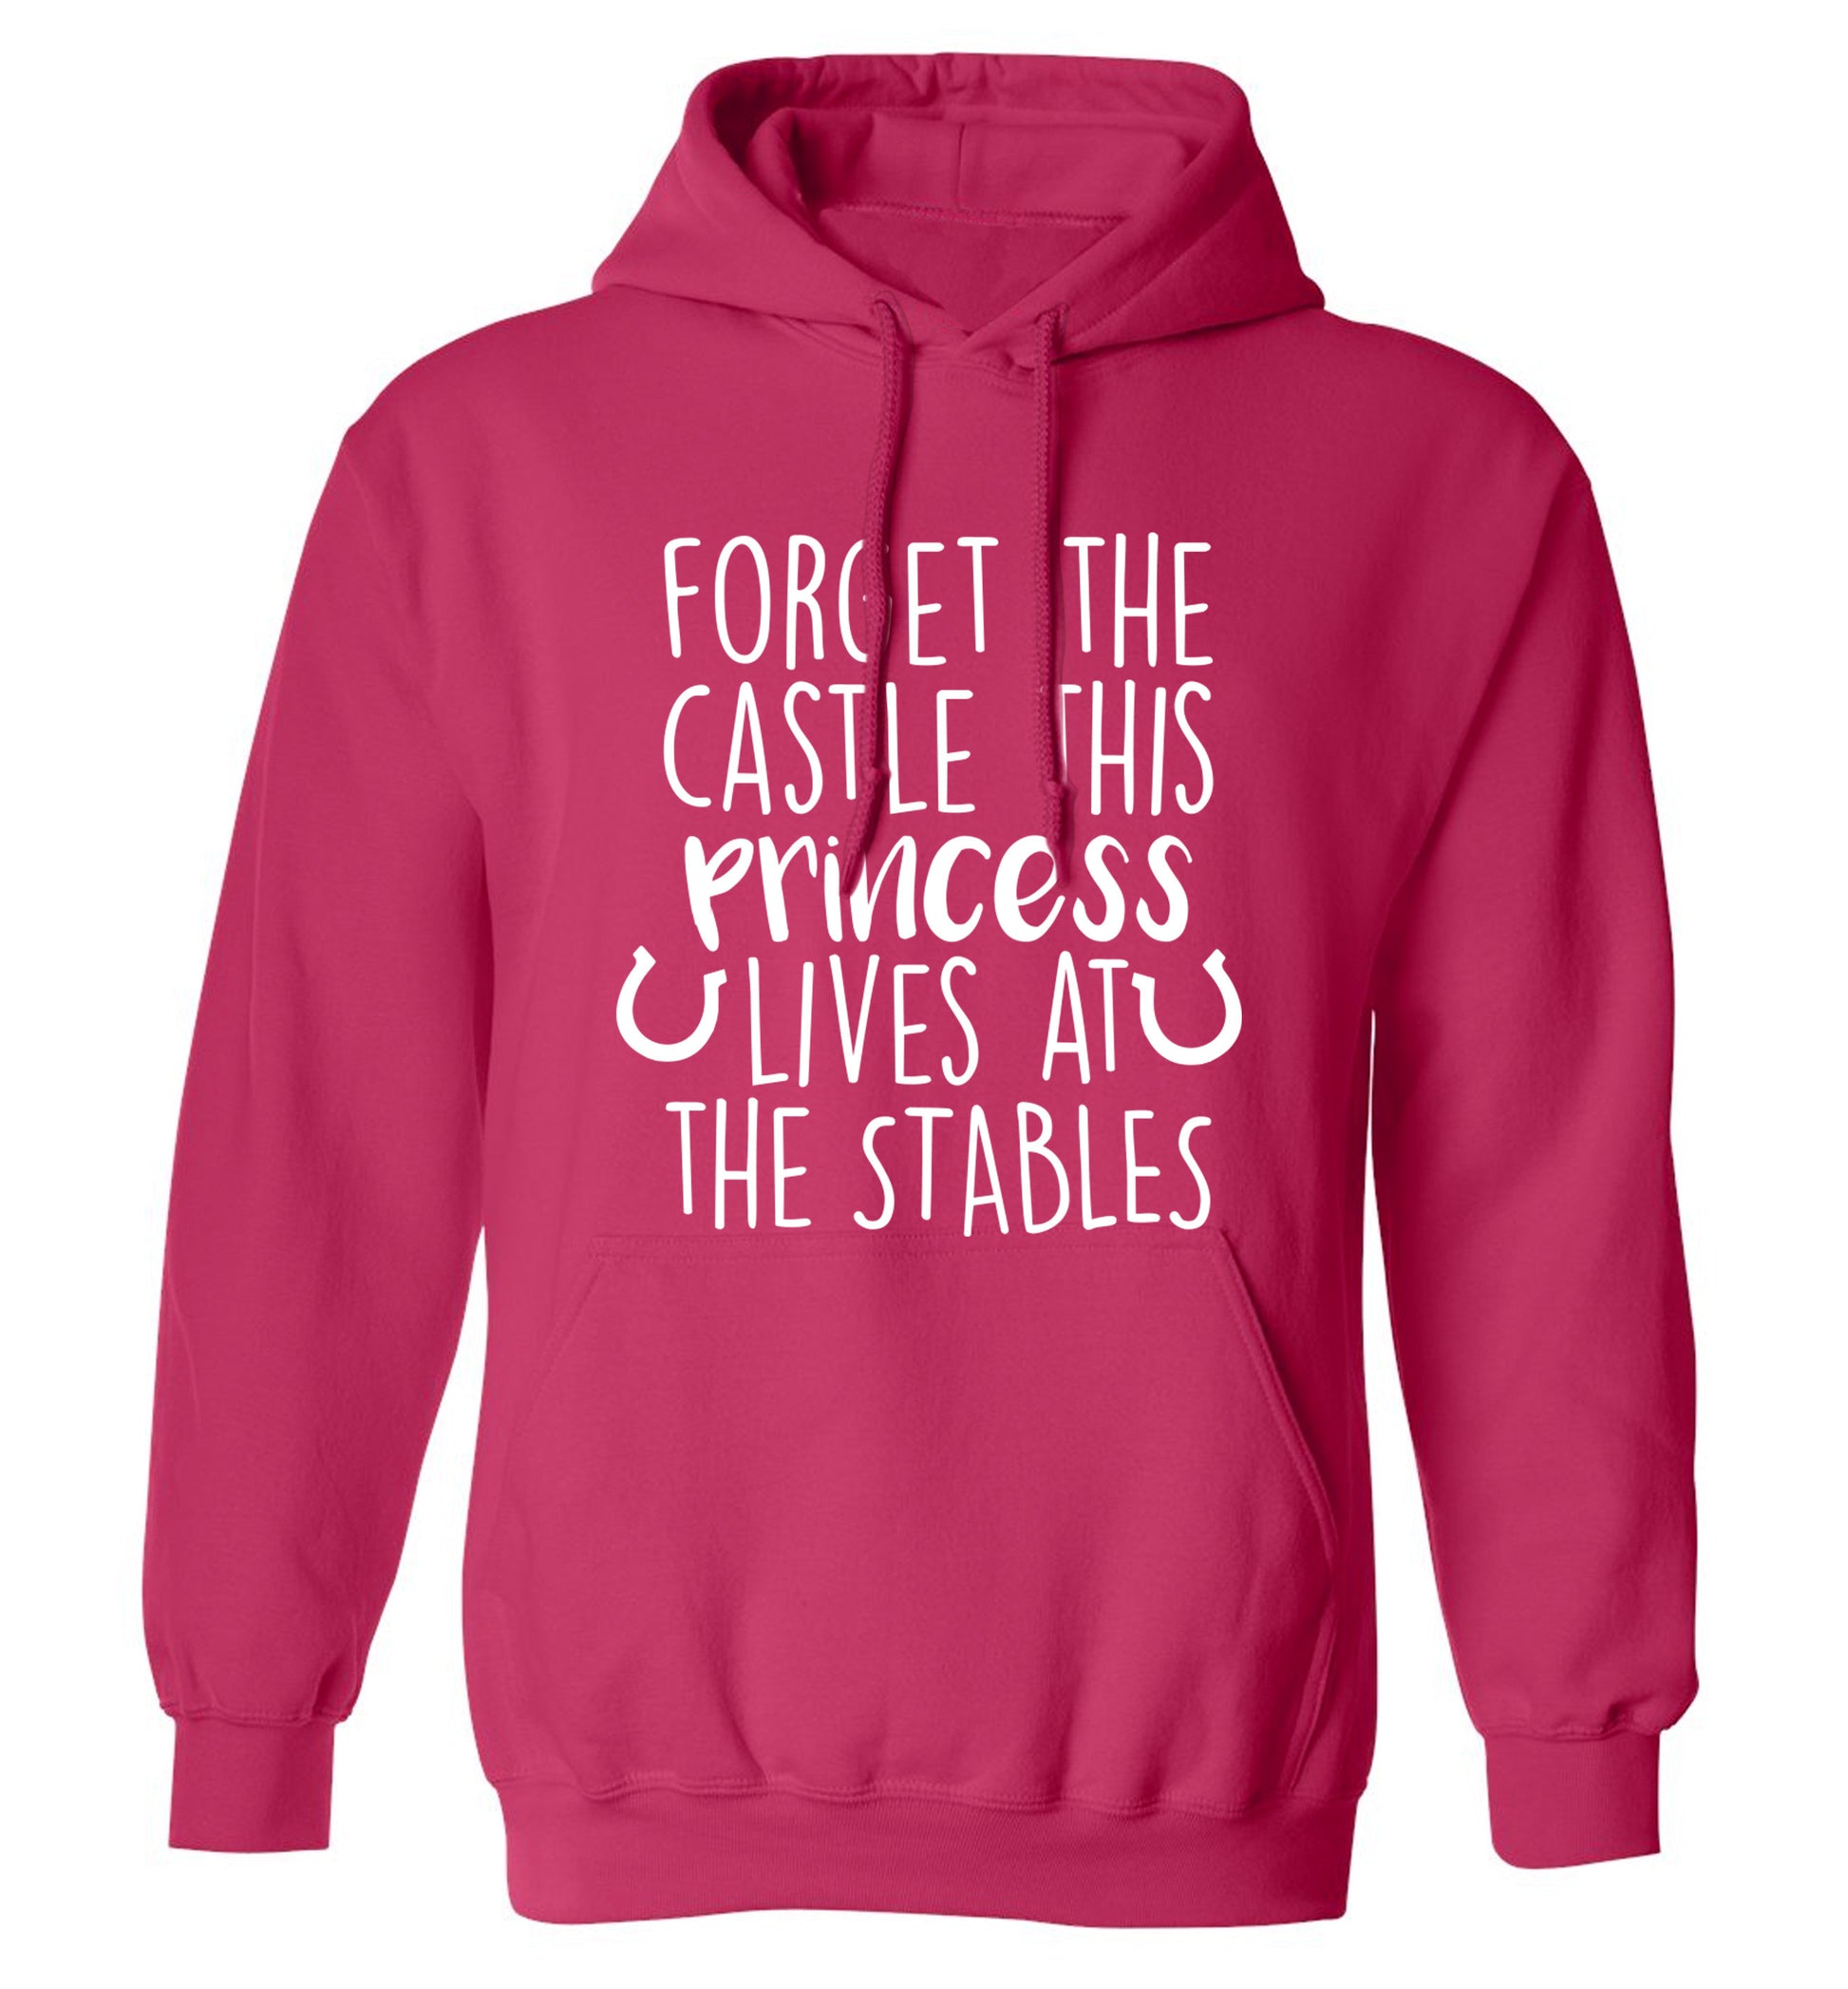 Forget the castle this princess lives at the stables adults unisex pink hoodie 2XL